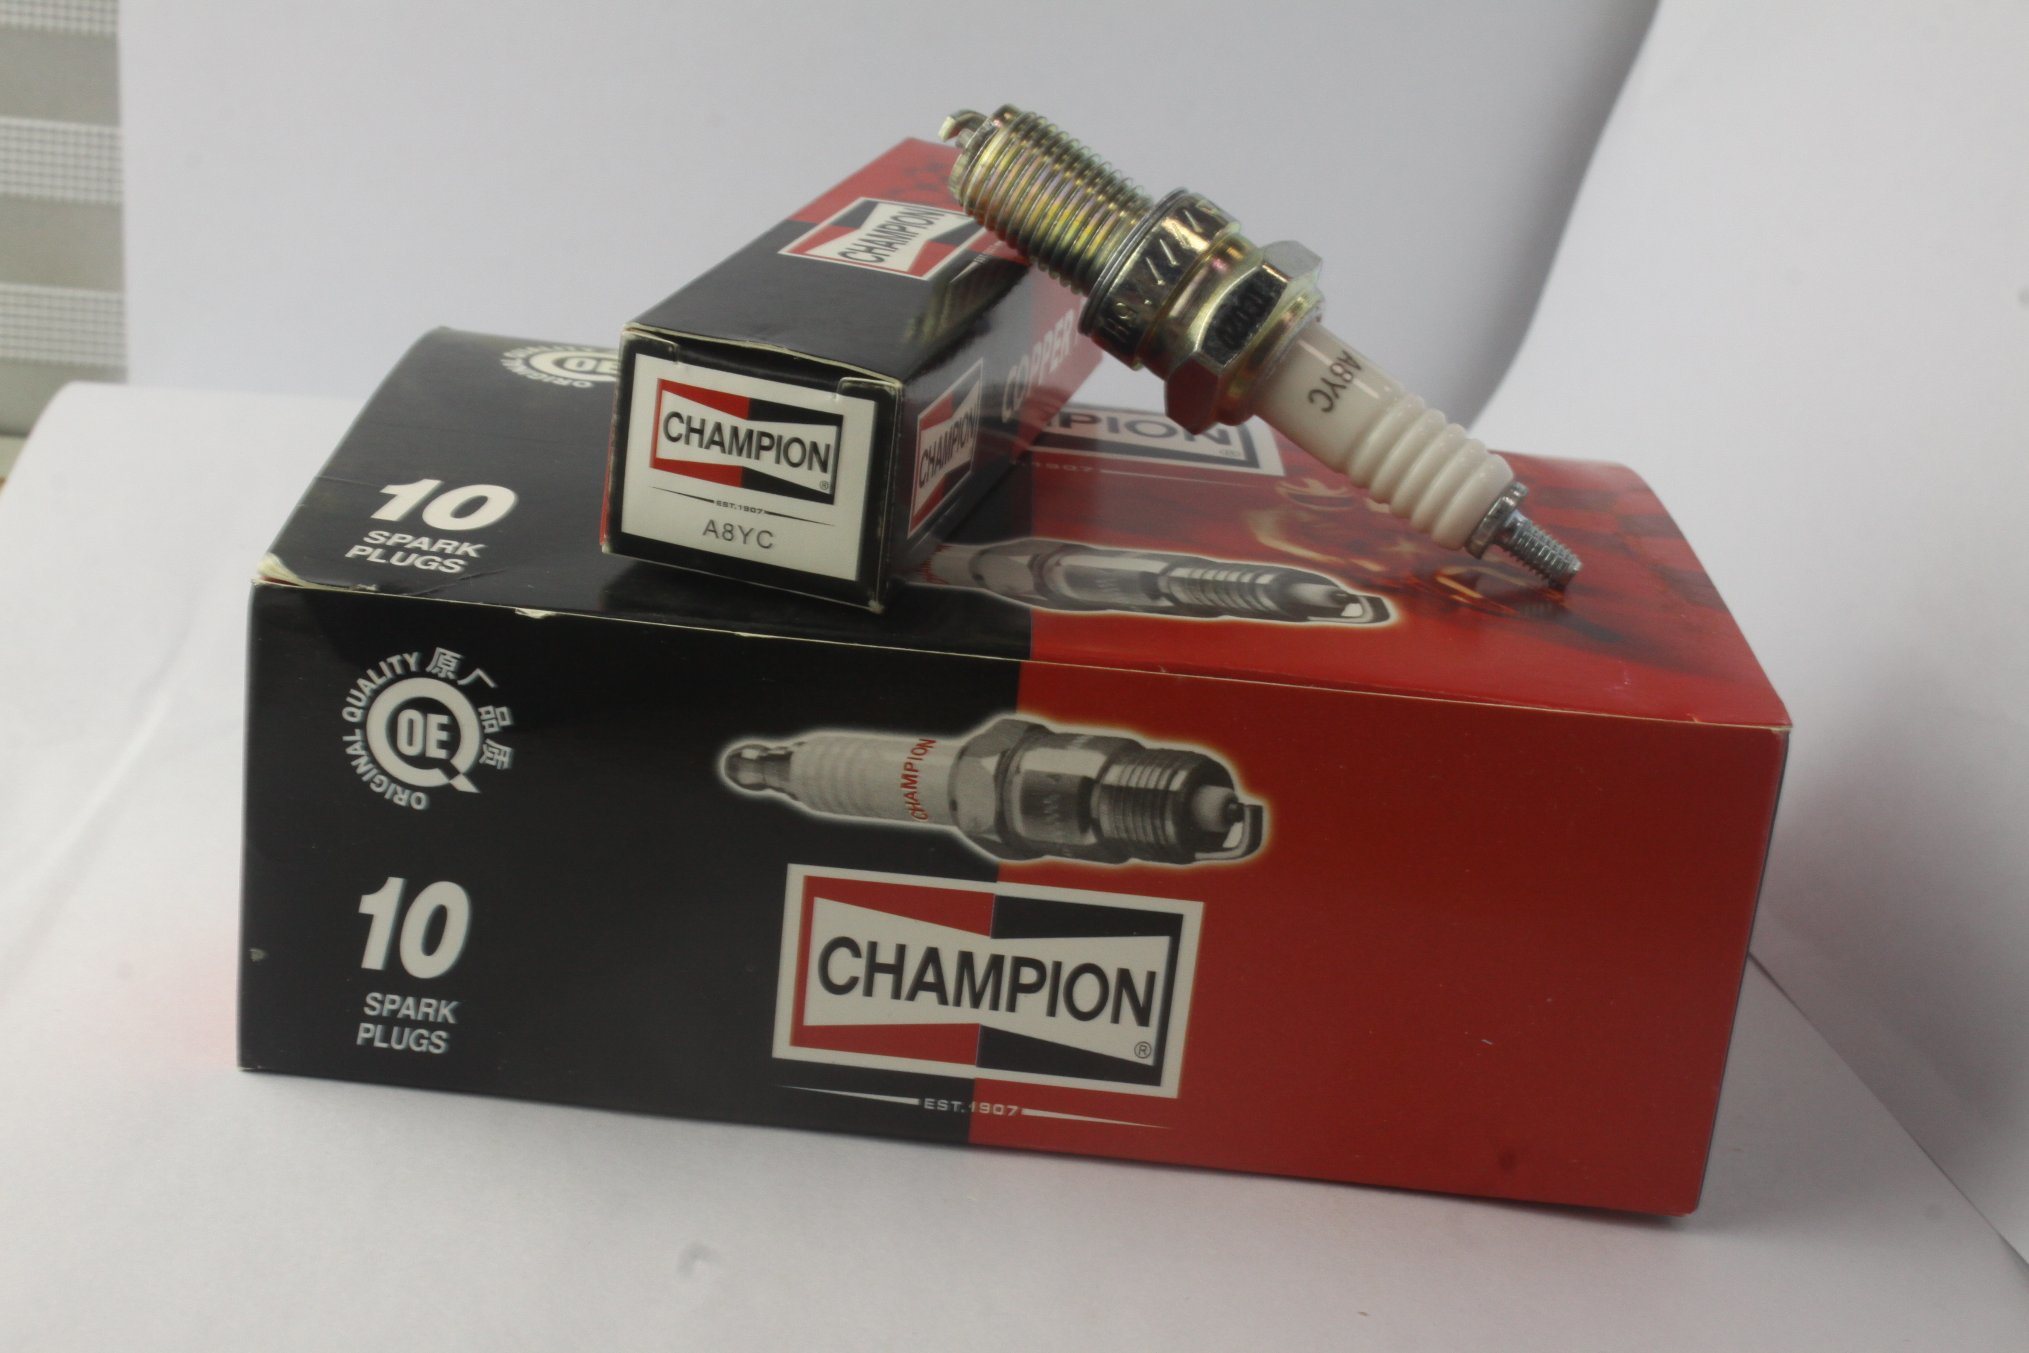 Spark Plug Motorcycle Parts for Champiom A8yc